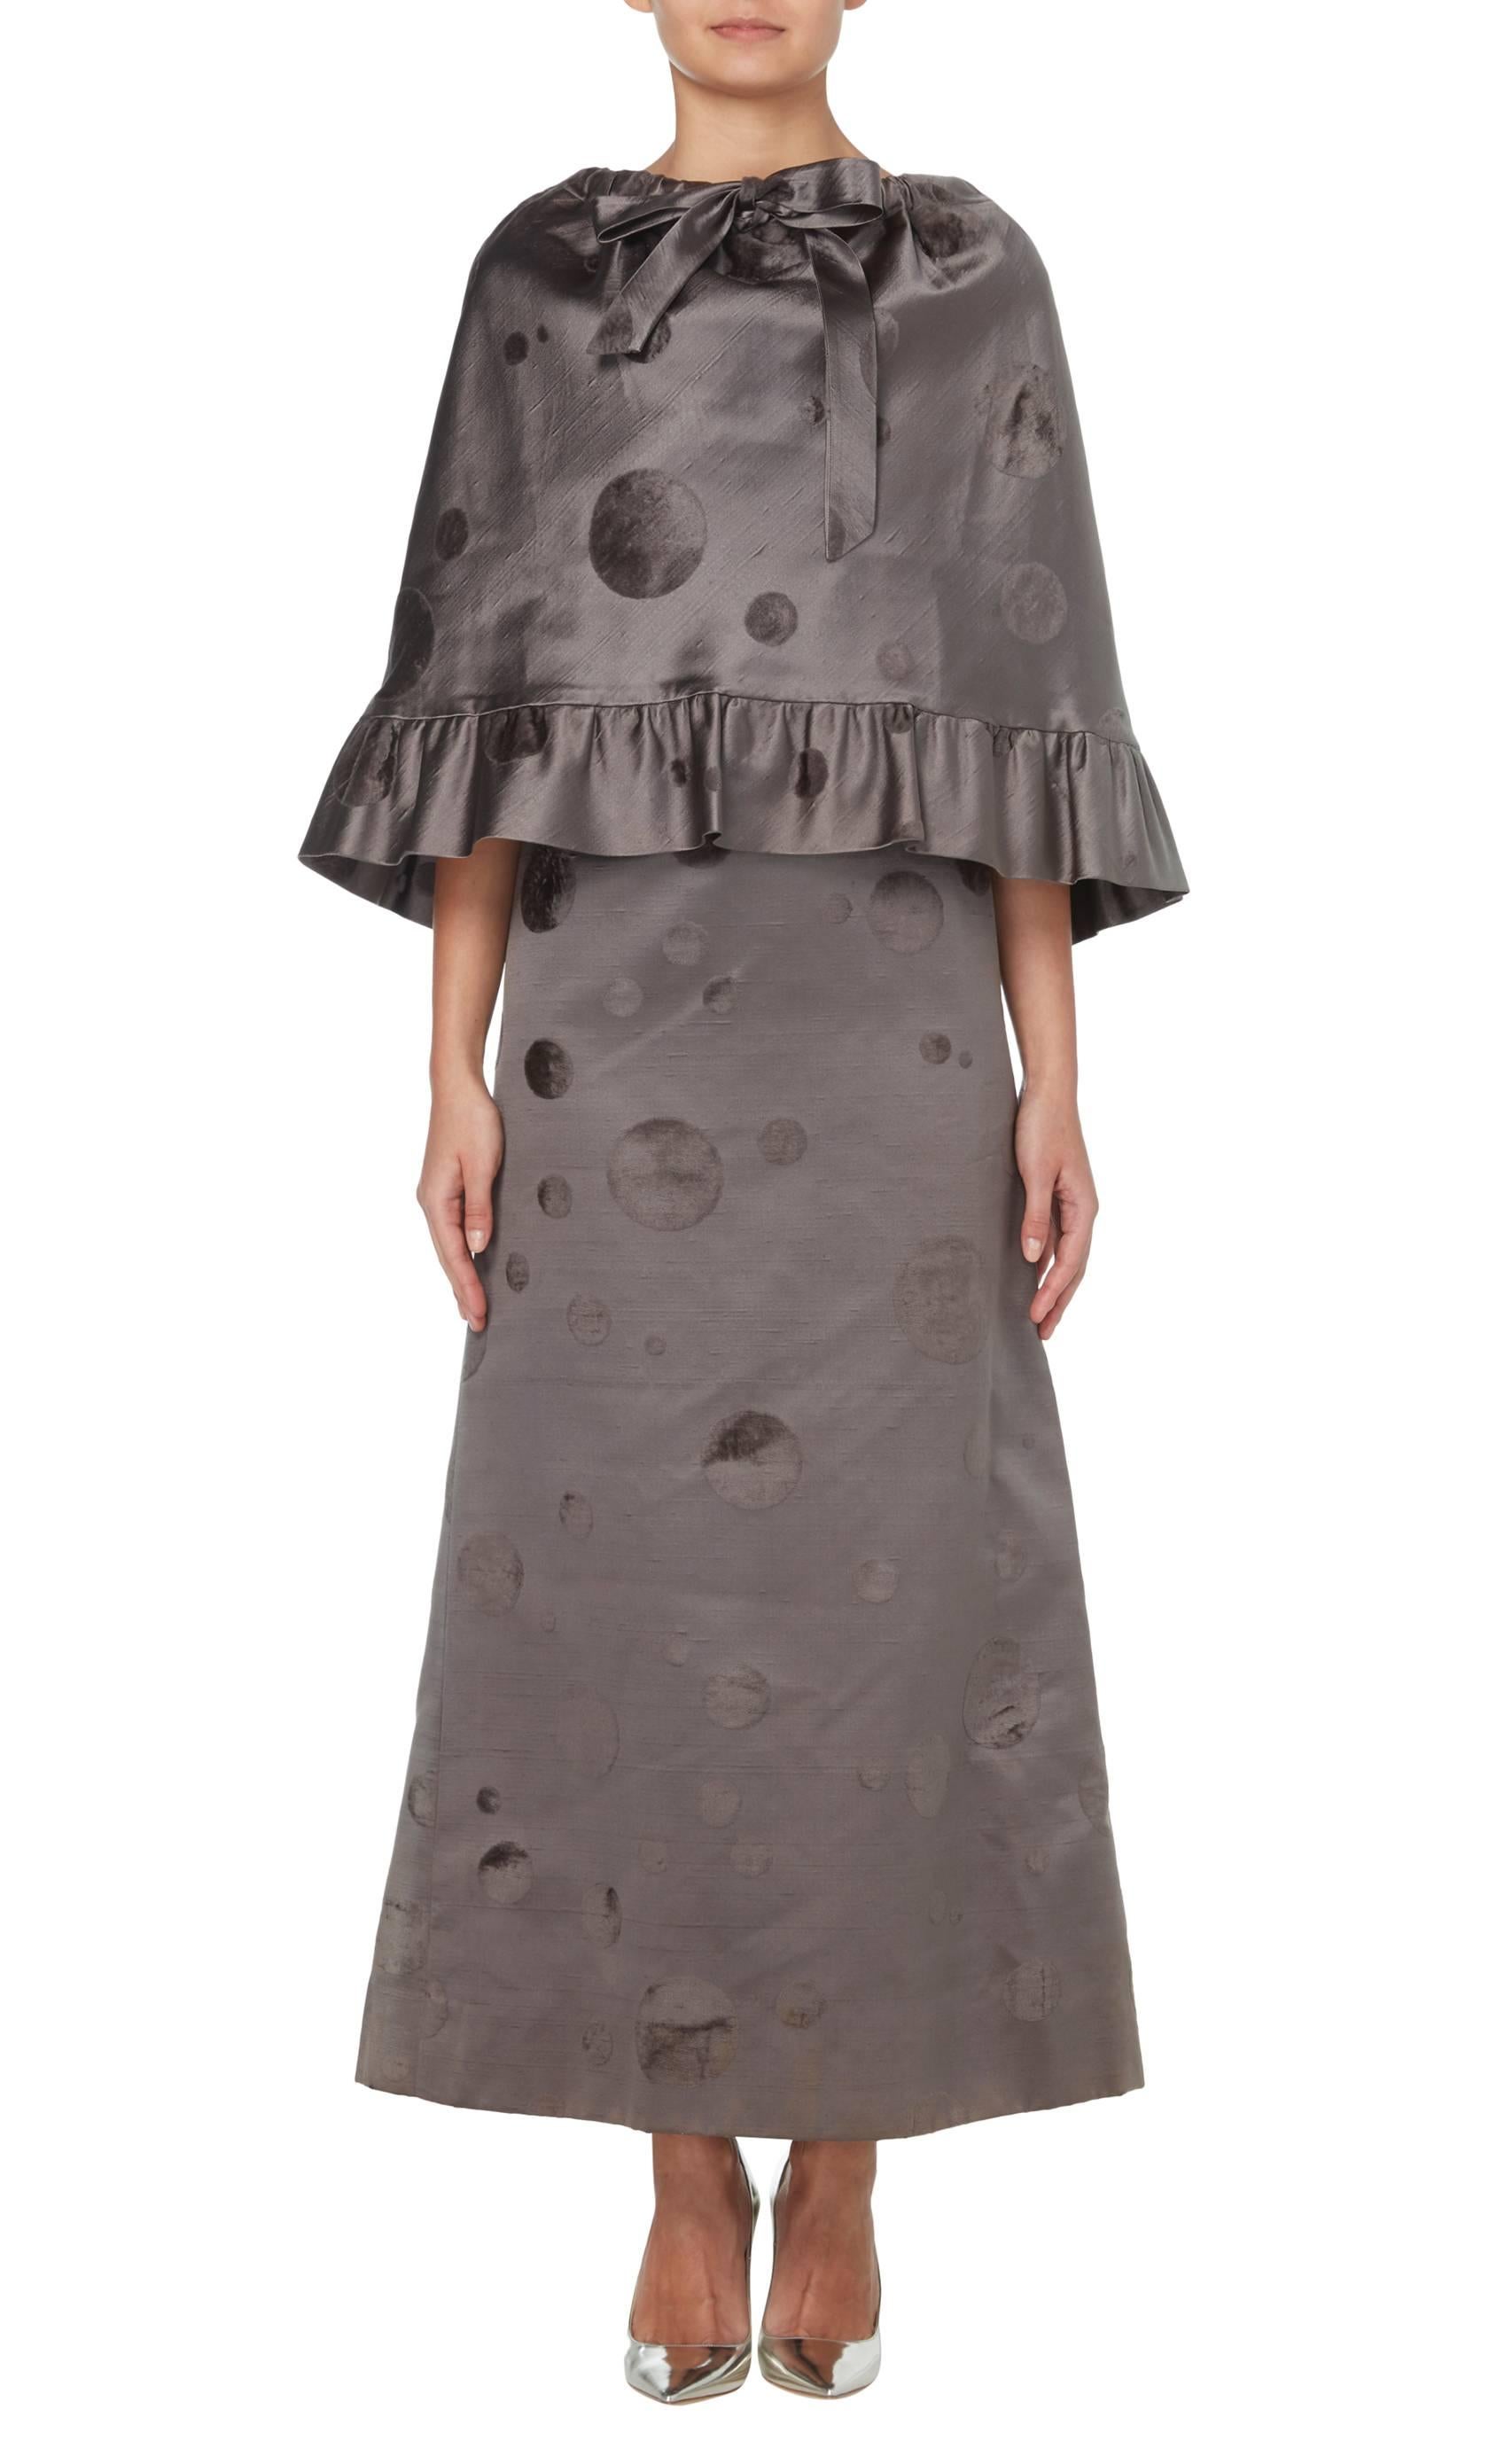 A fantastic statement piece, this Pierre Cardin full-length dress and matching capelet is perfect for black tie events. The pewter silk features flocked-effect polka dots in varying sizes, which give a subtle contrast in texture and colour while